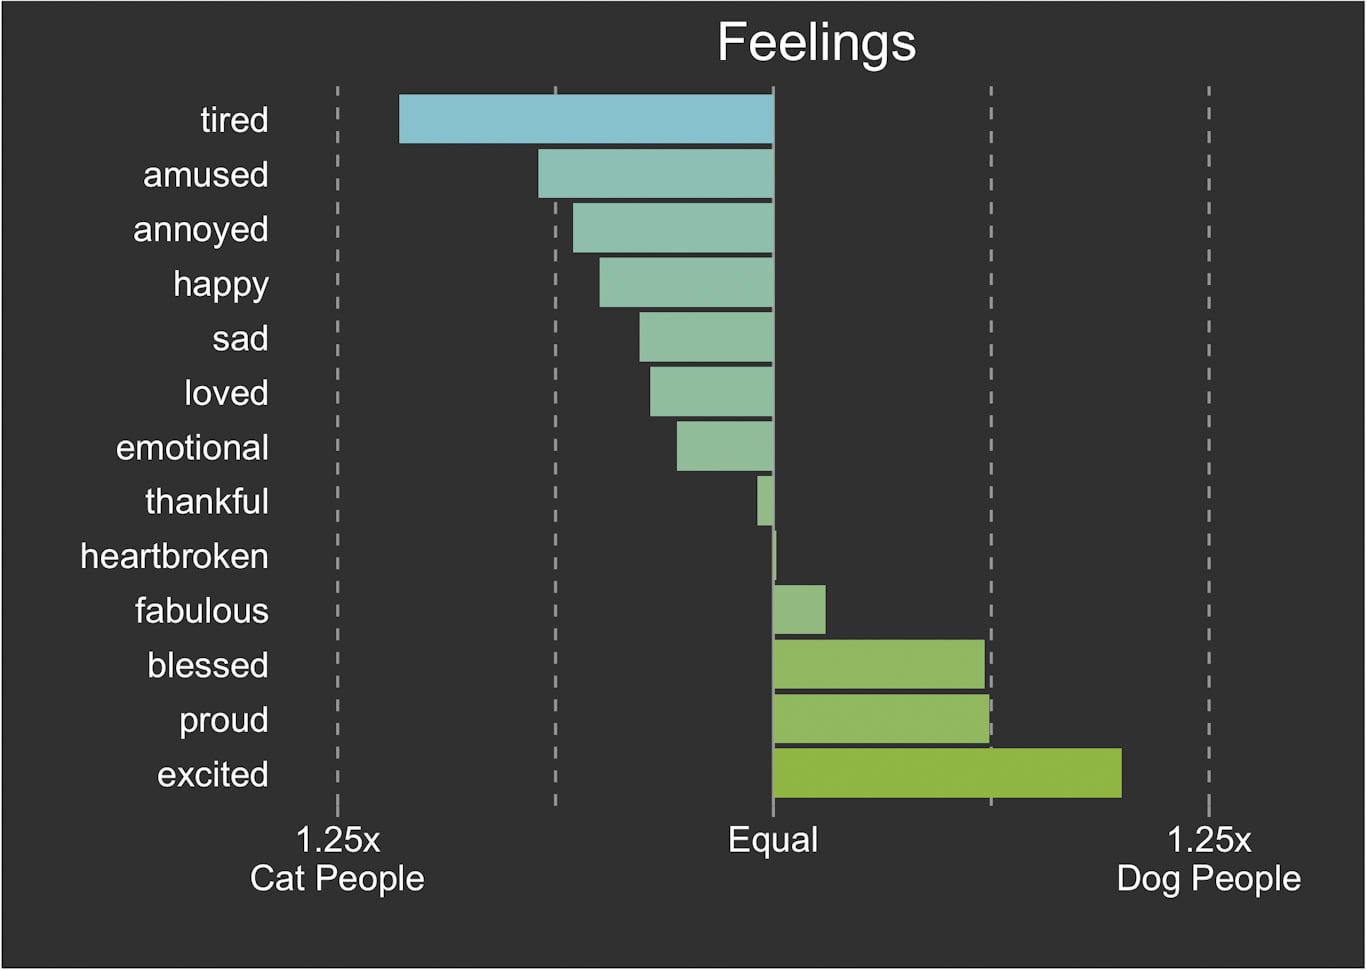 Moods of cat and dog people compared